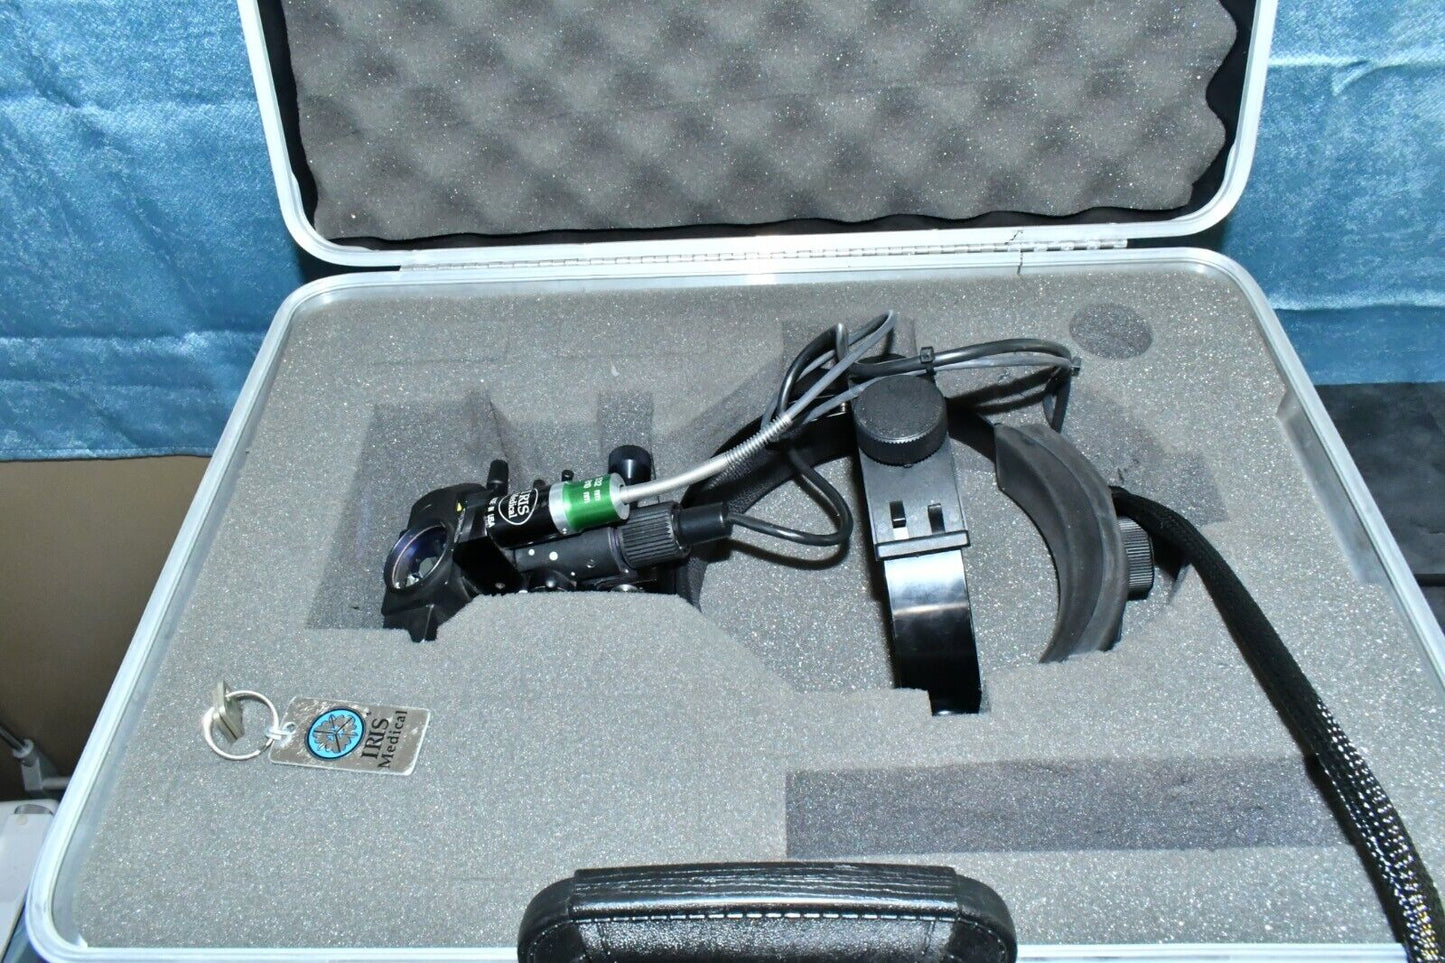 Iridex GLx with LIO Plus Laser indirect ophthalmoscope and case